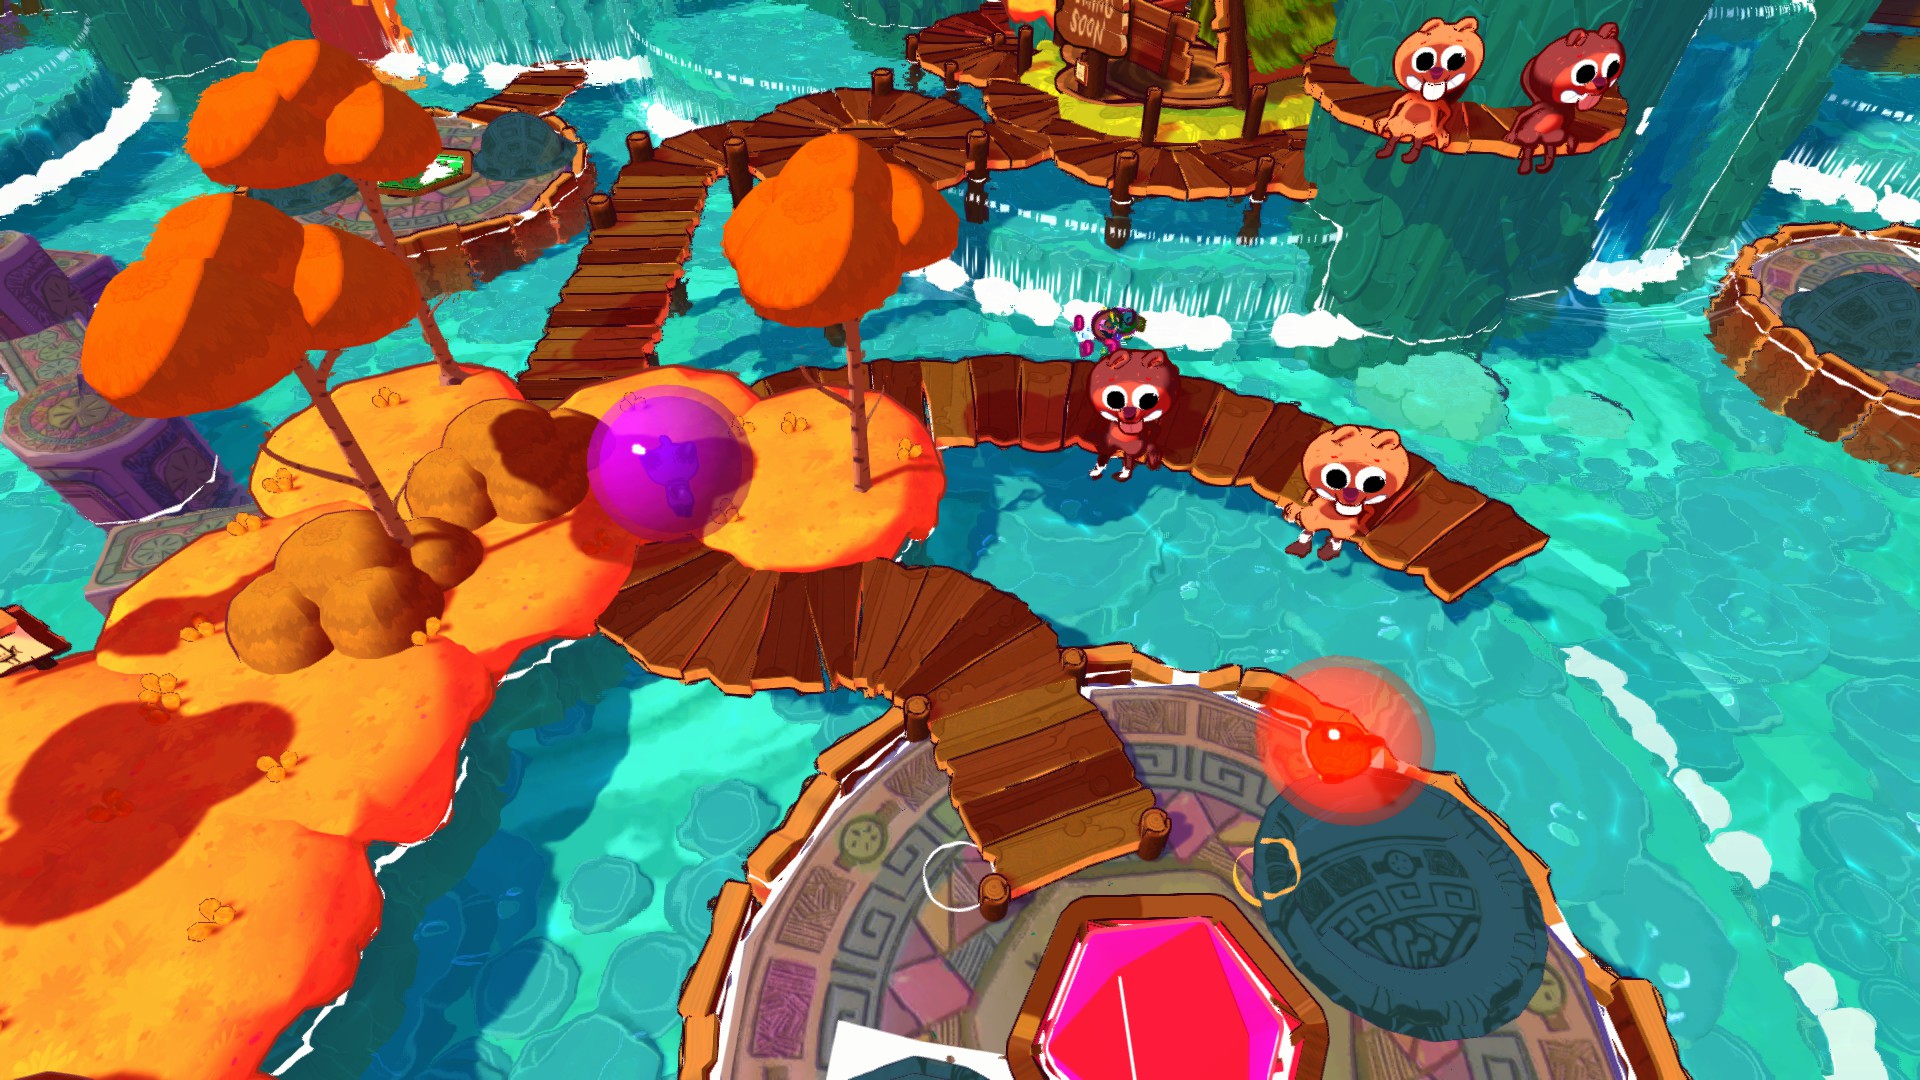 Various piers and trees are visible, sat on the edge of the piers are four beavers. Both players are in bright orange and purple spheres. lower a platform with aztec or mayan inspired ruins.